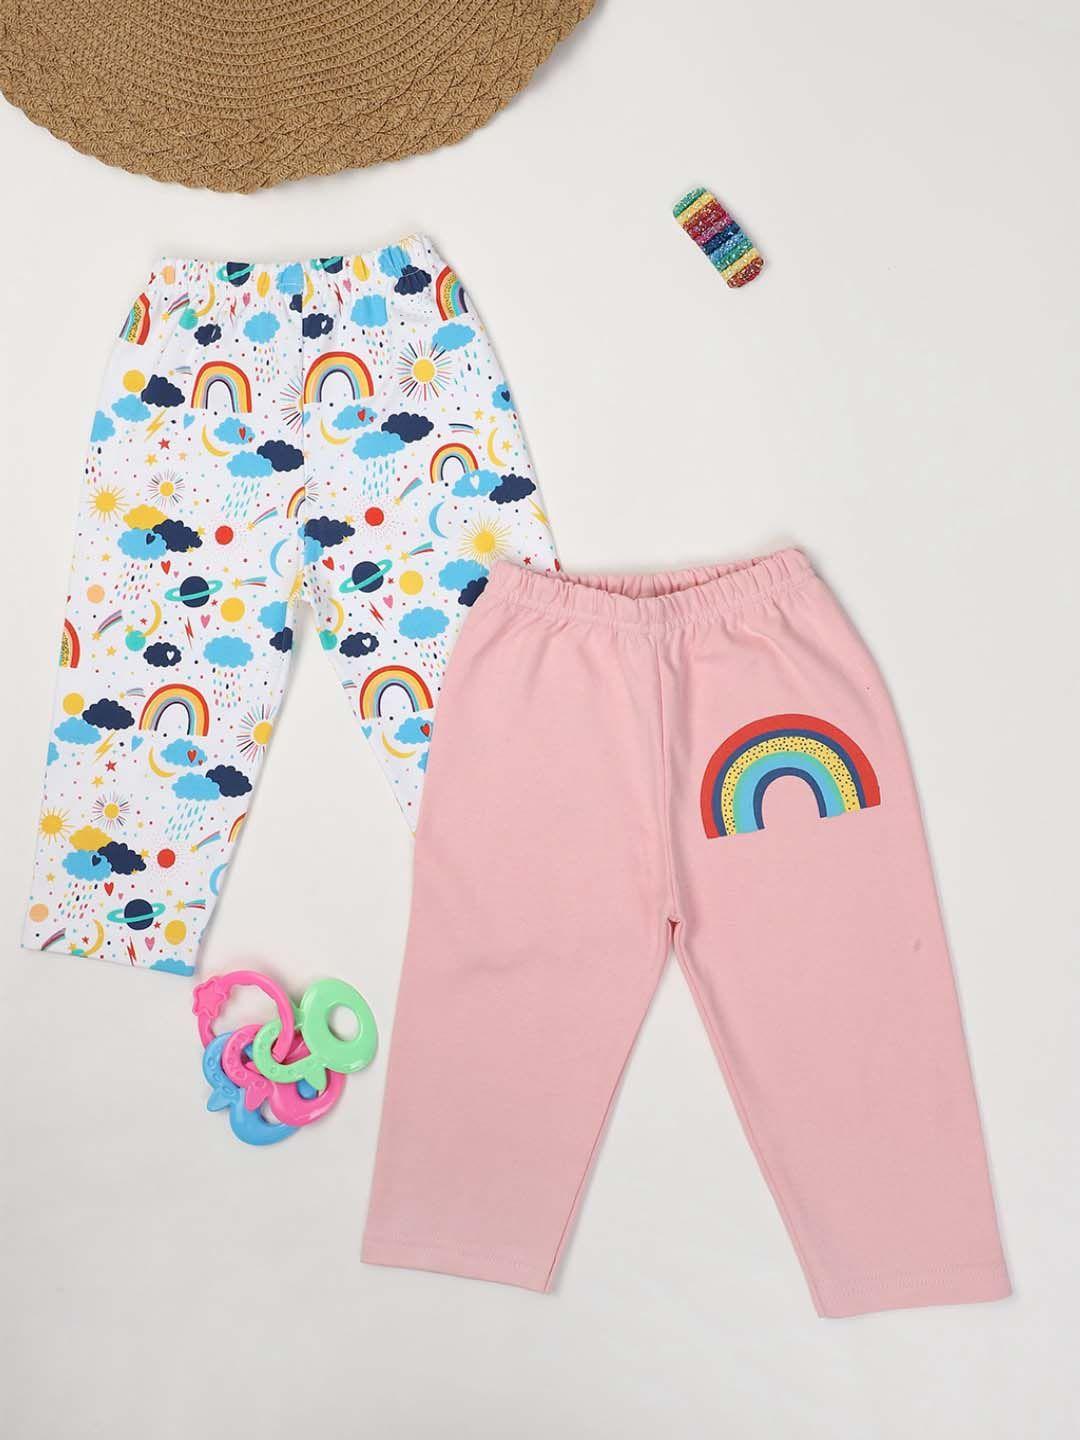 v-mart-infants-pack-of-2-conversational-printed-cotton-trousers